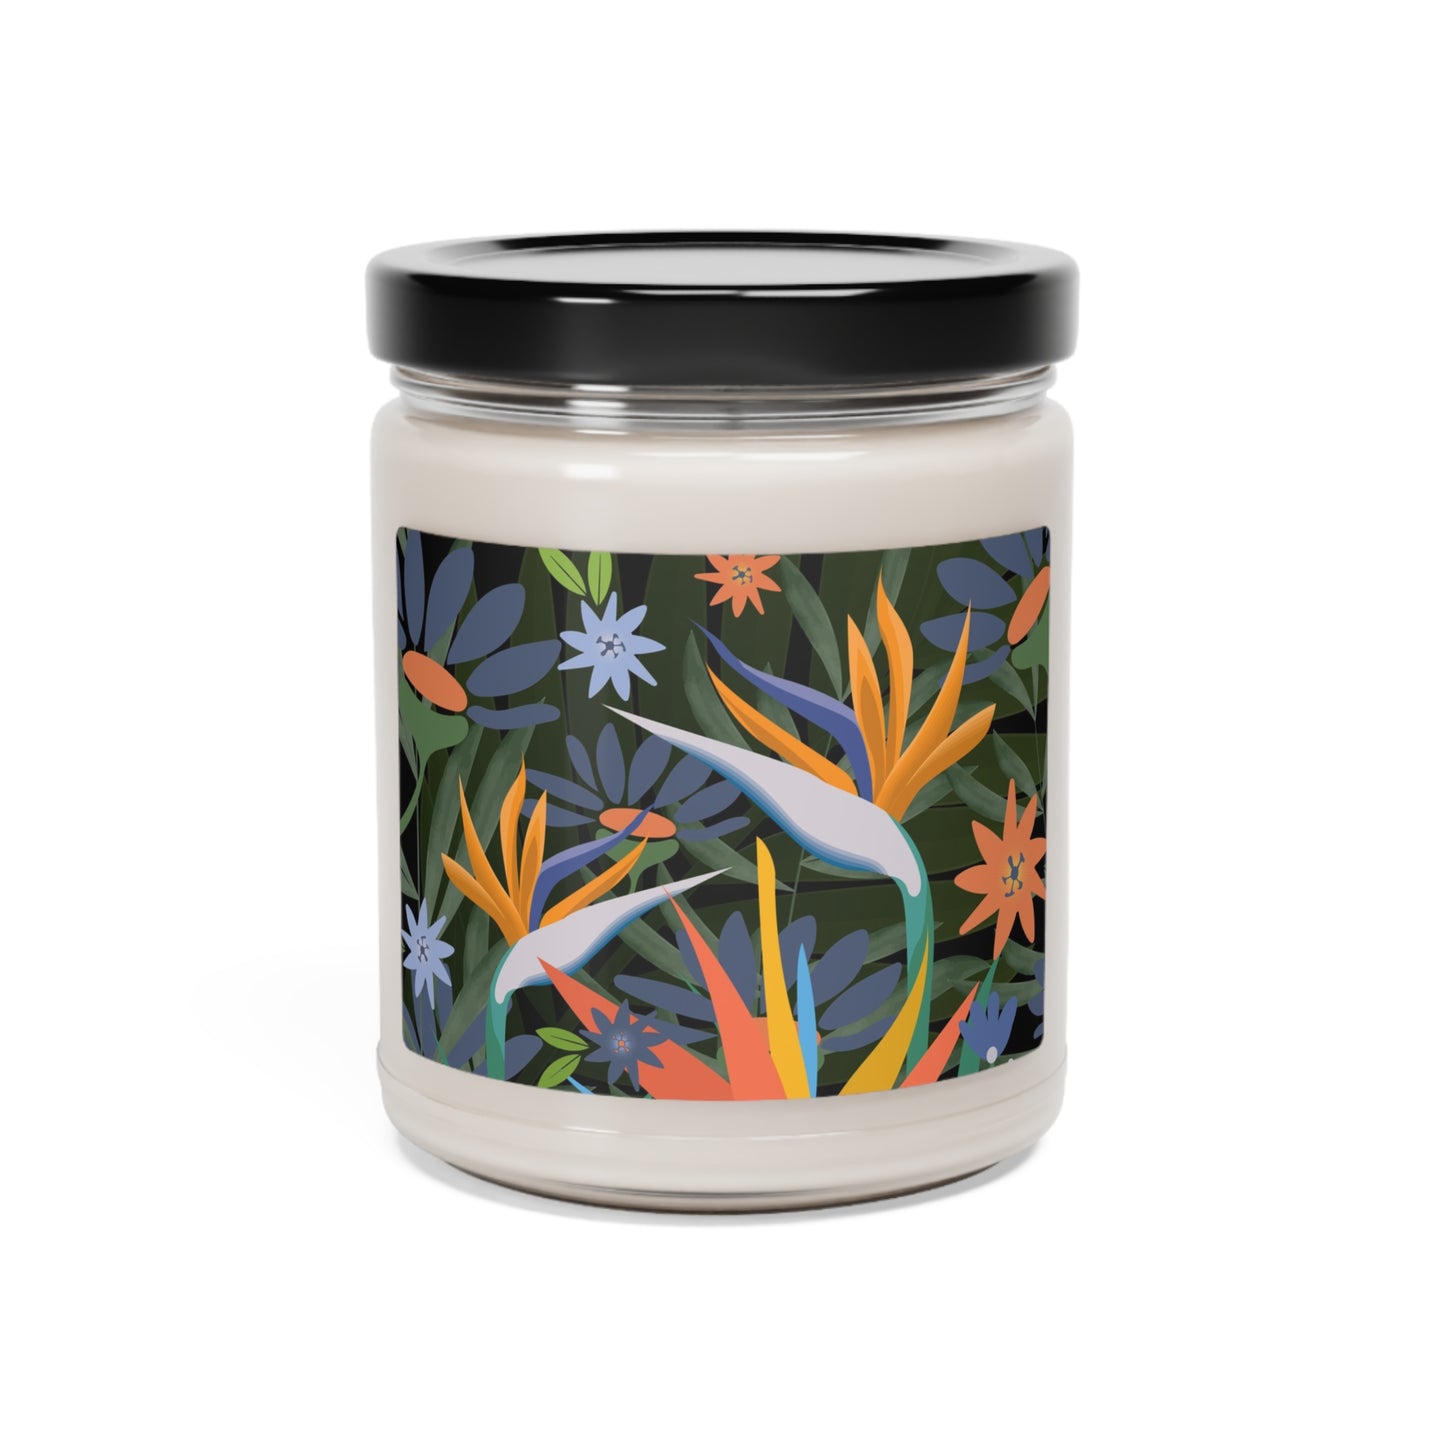 Bird of paradise Scented Soy Candle, 9oz, Tropical Boho Scented Candle, Home Gift Idea!